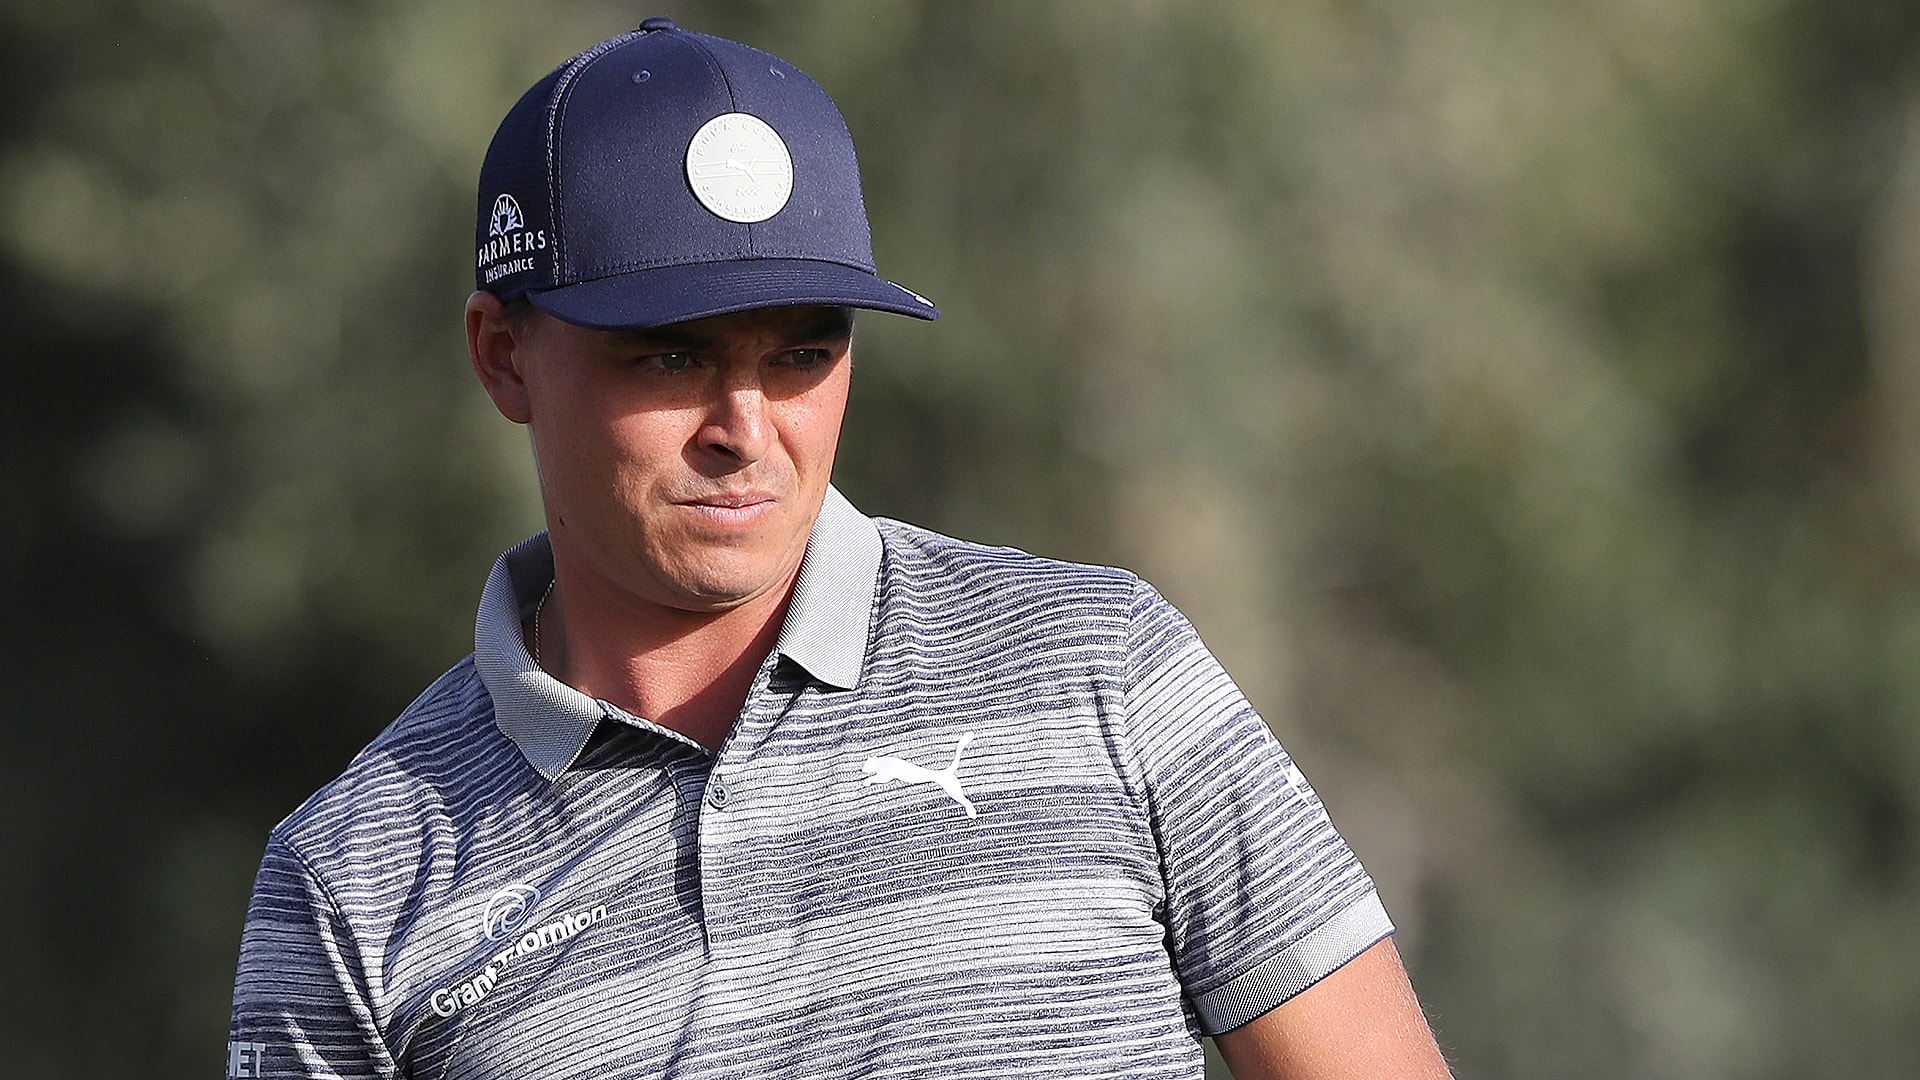 Rickie Fowler laments bad shots that led to missed cut last week at Shriners